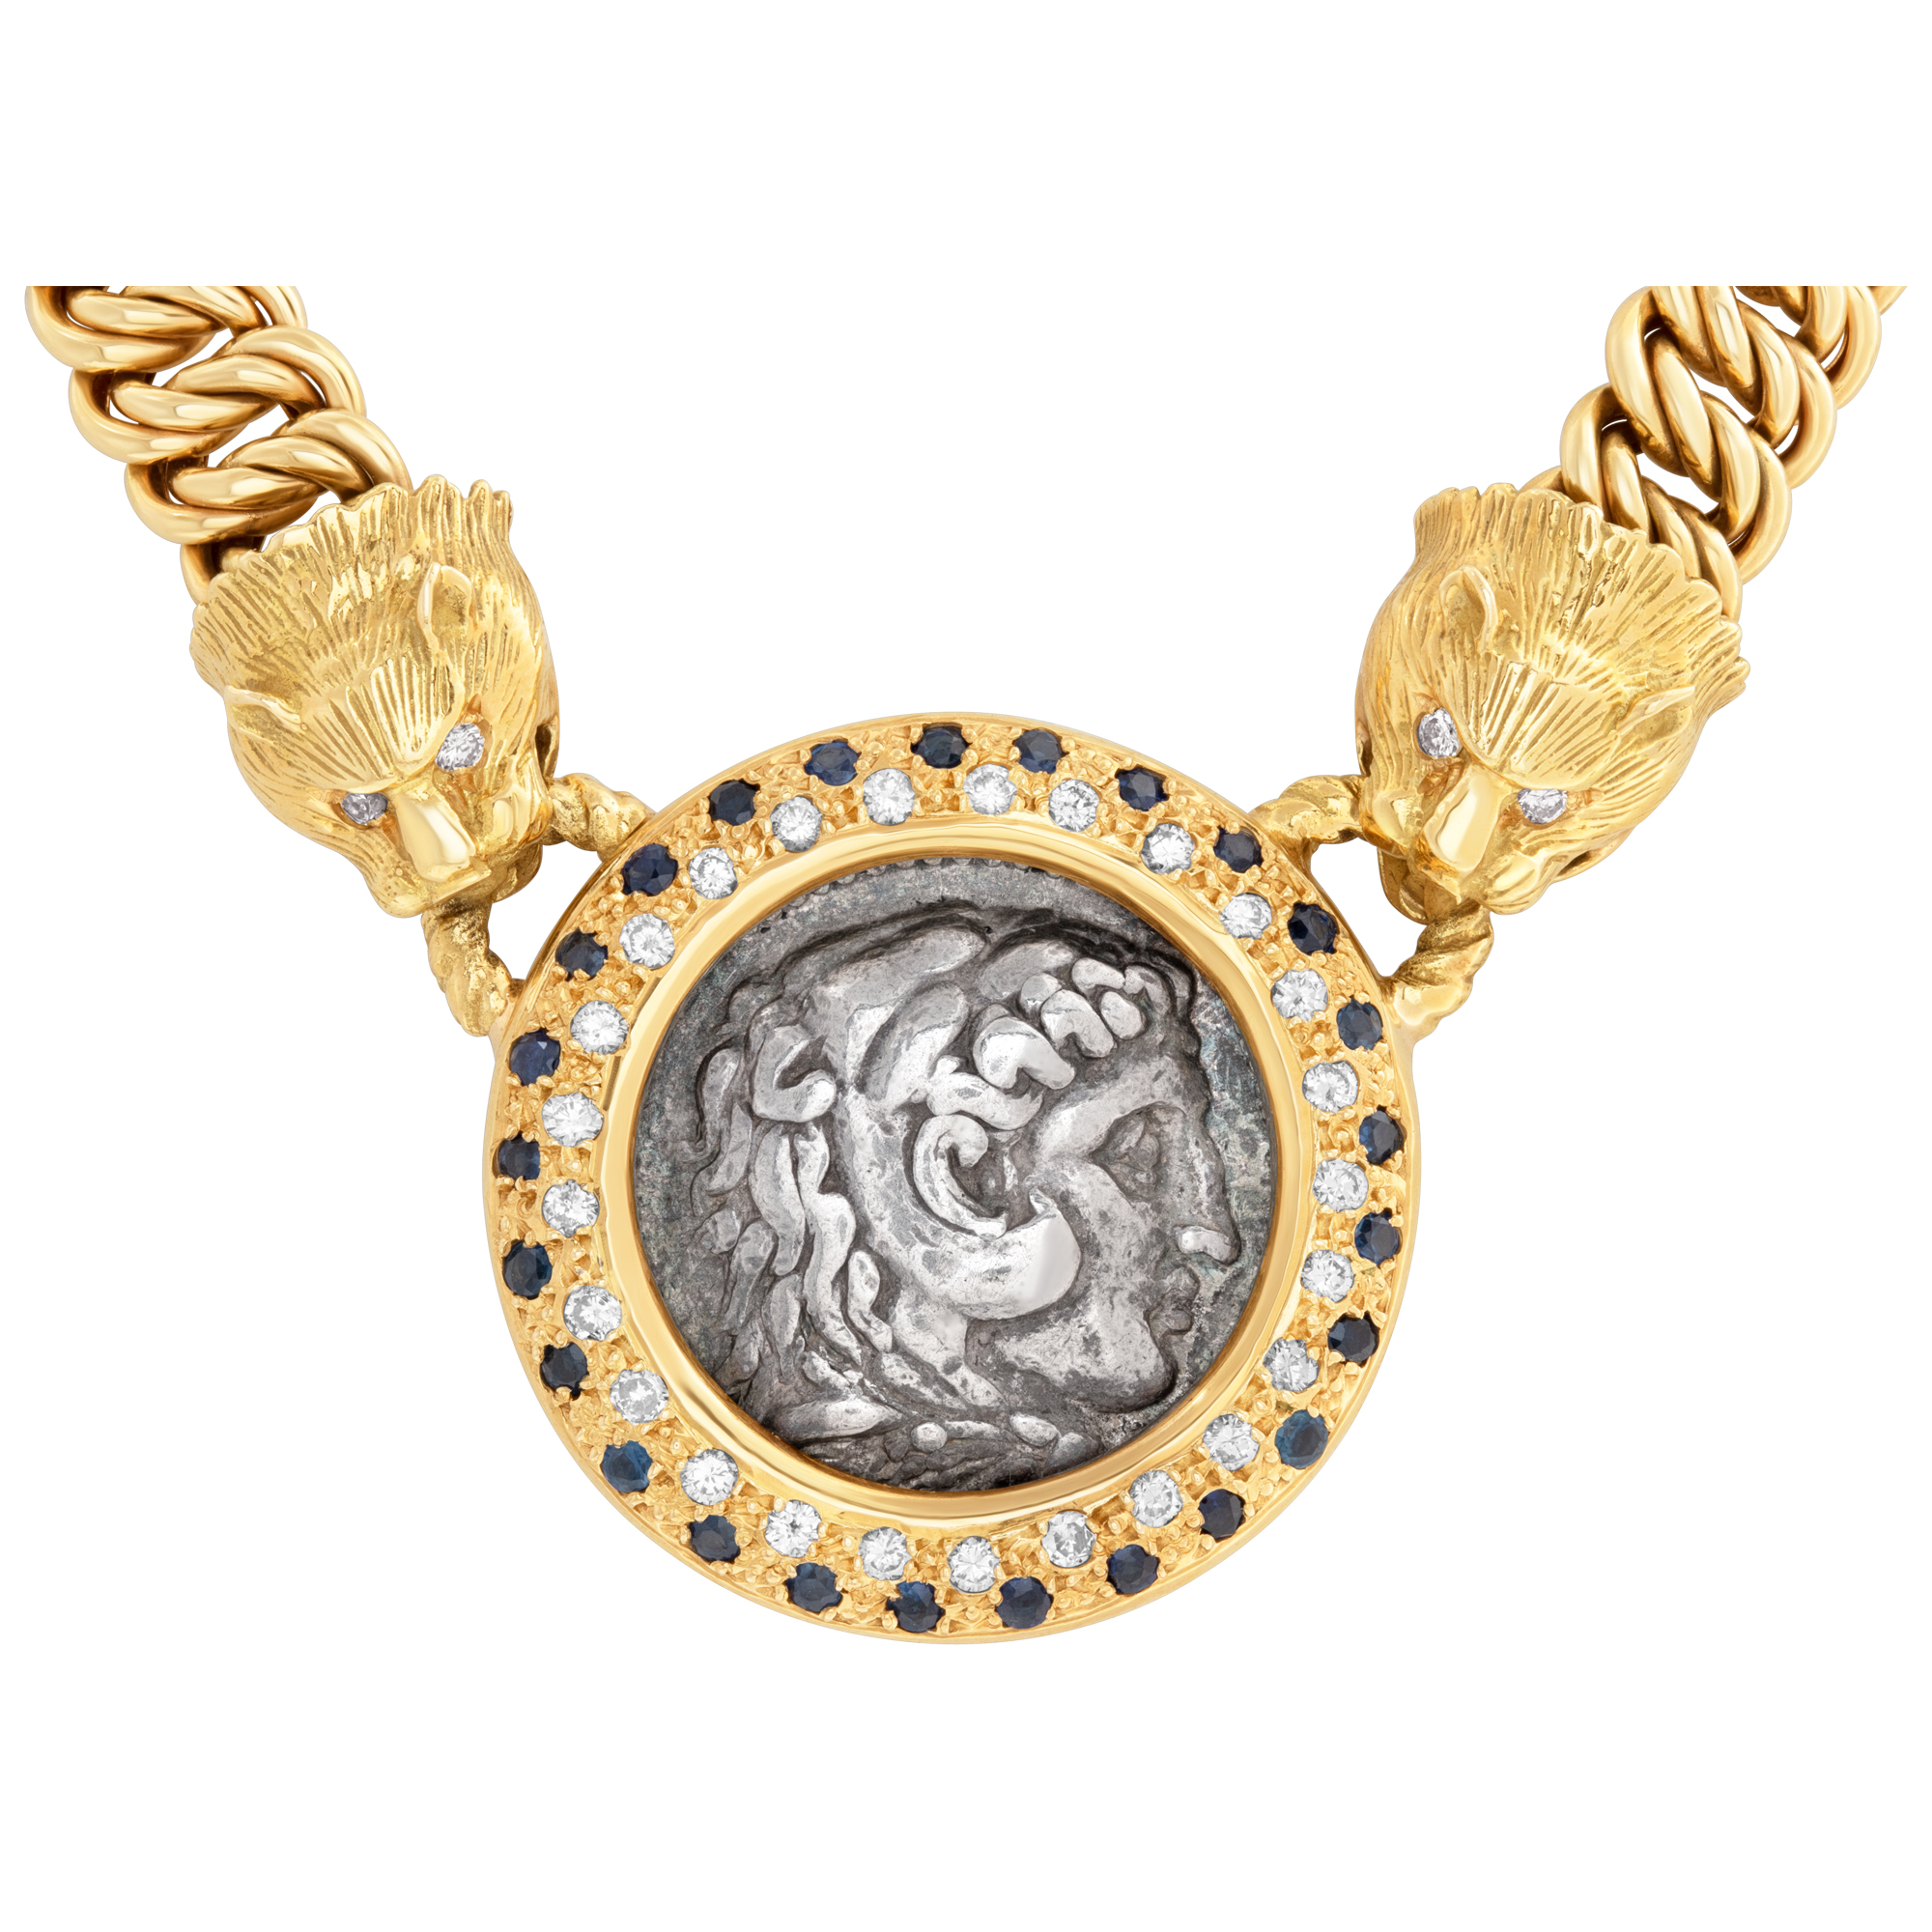 Chain/necklace with Alexander the Great, greek drachma coin center pendant, set in 14k gold, with diamonds & sapphires. image 1